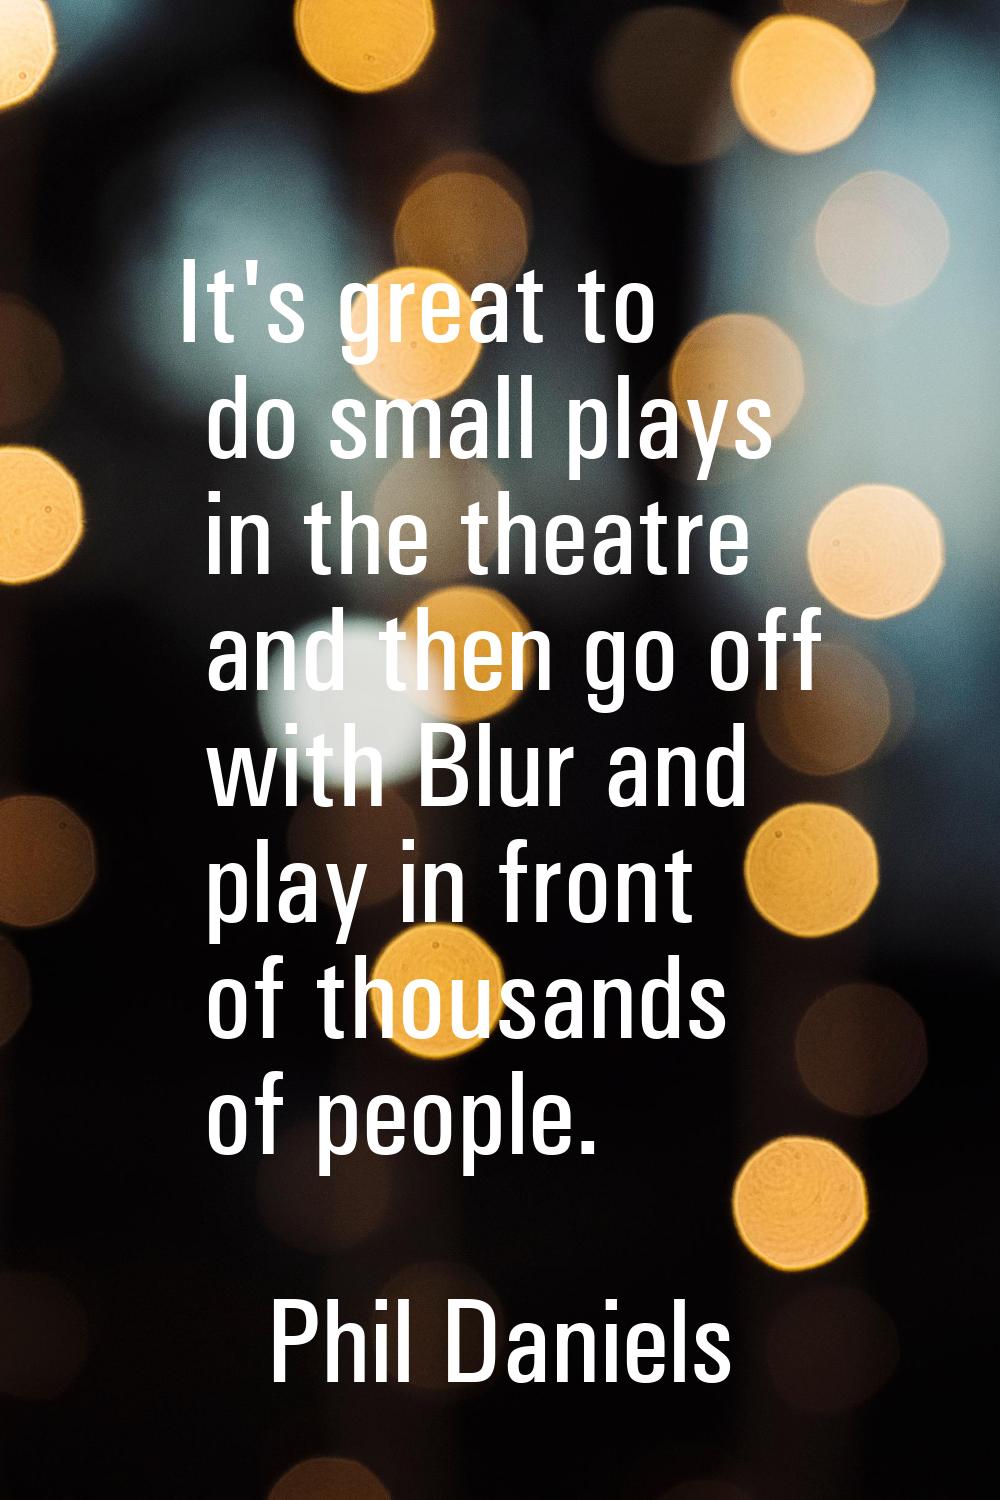 It's great to do small plays in the theatre and then go off with Blur and play in front of thousand